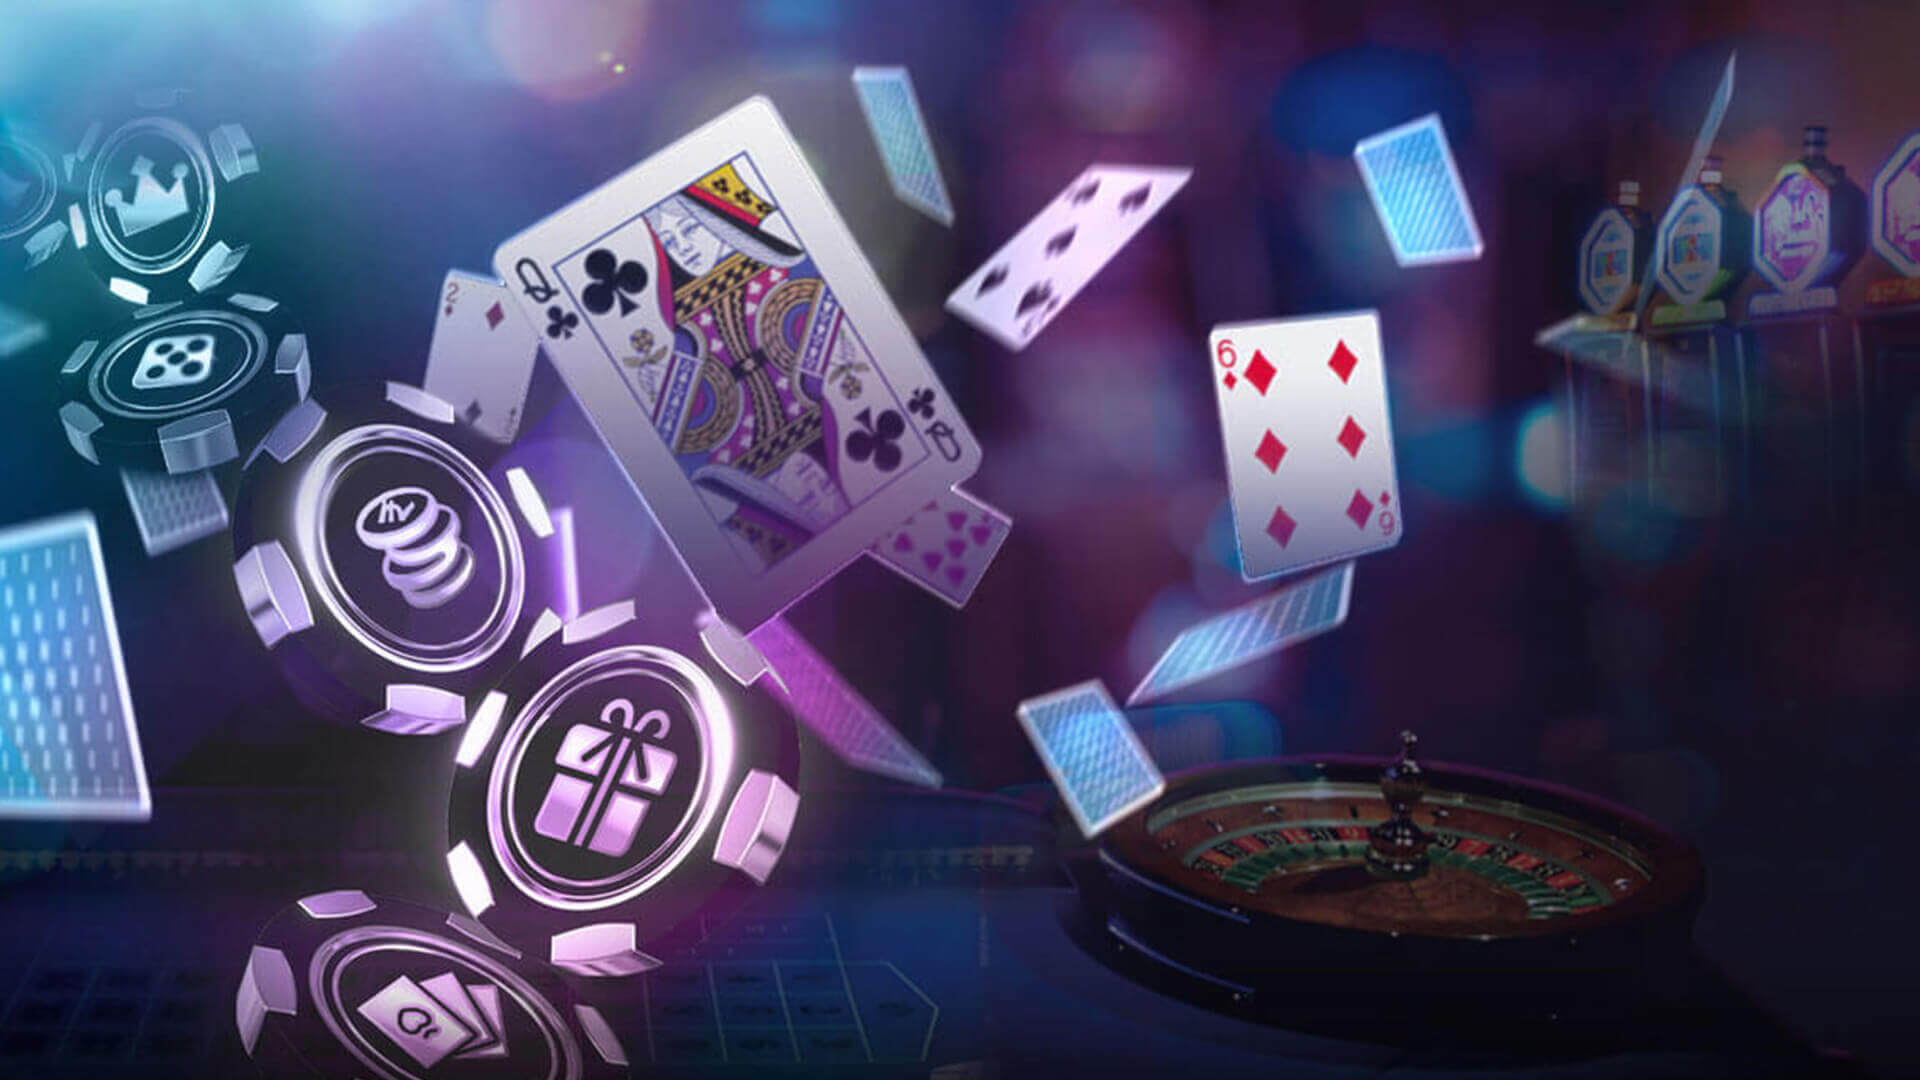 What Make SLOT GAMBLING SITE Don’t Want You To Know